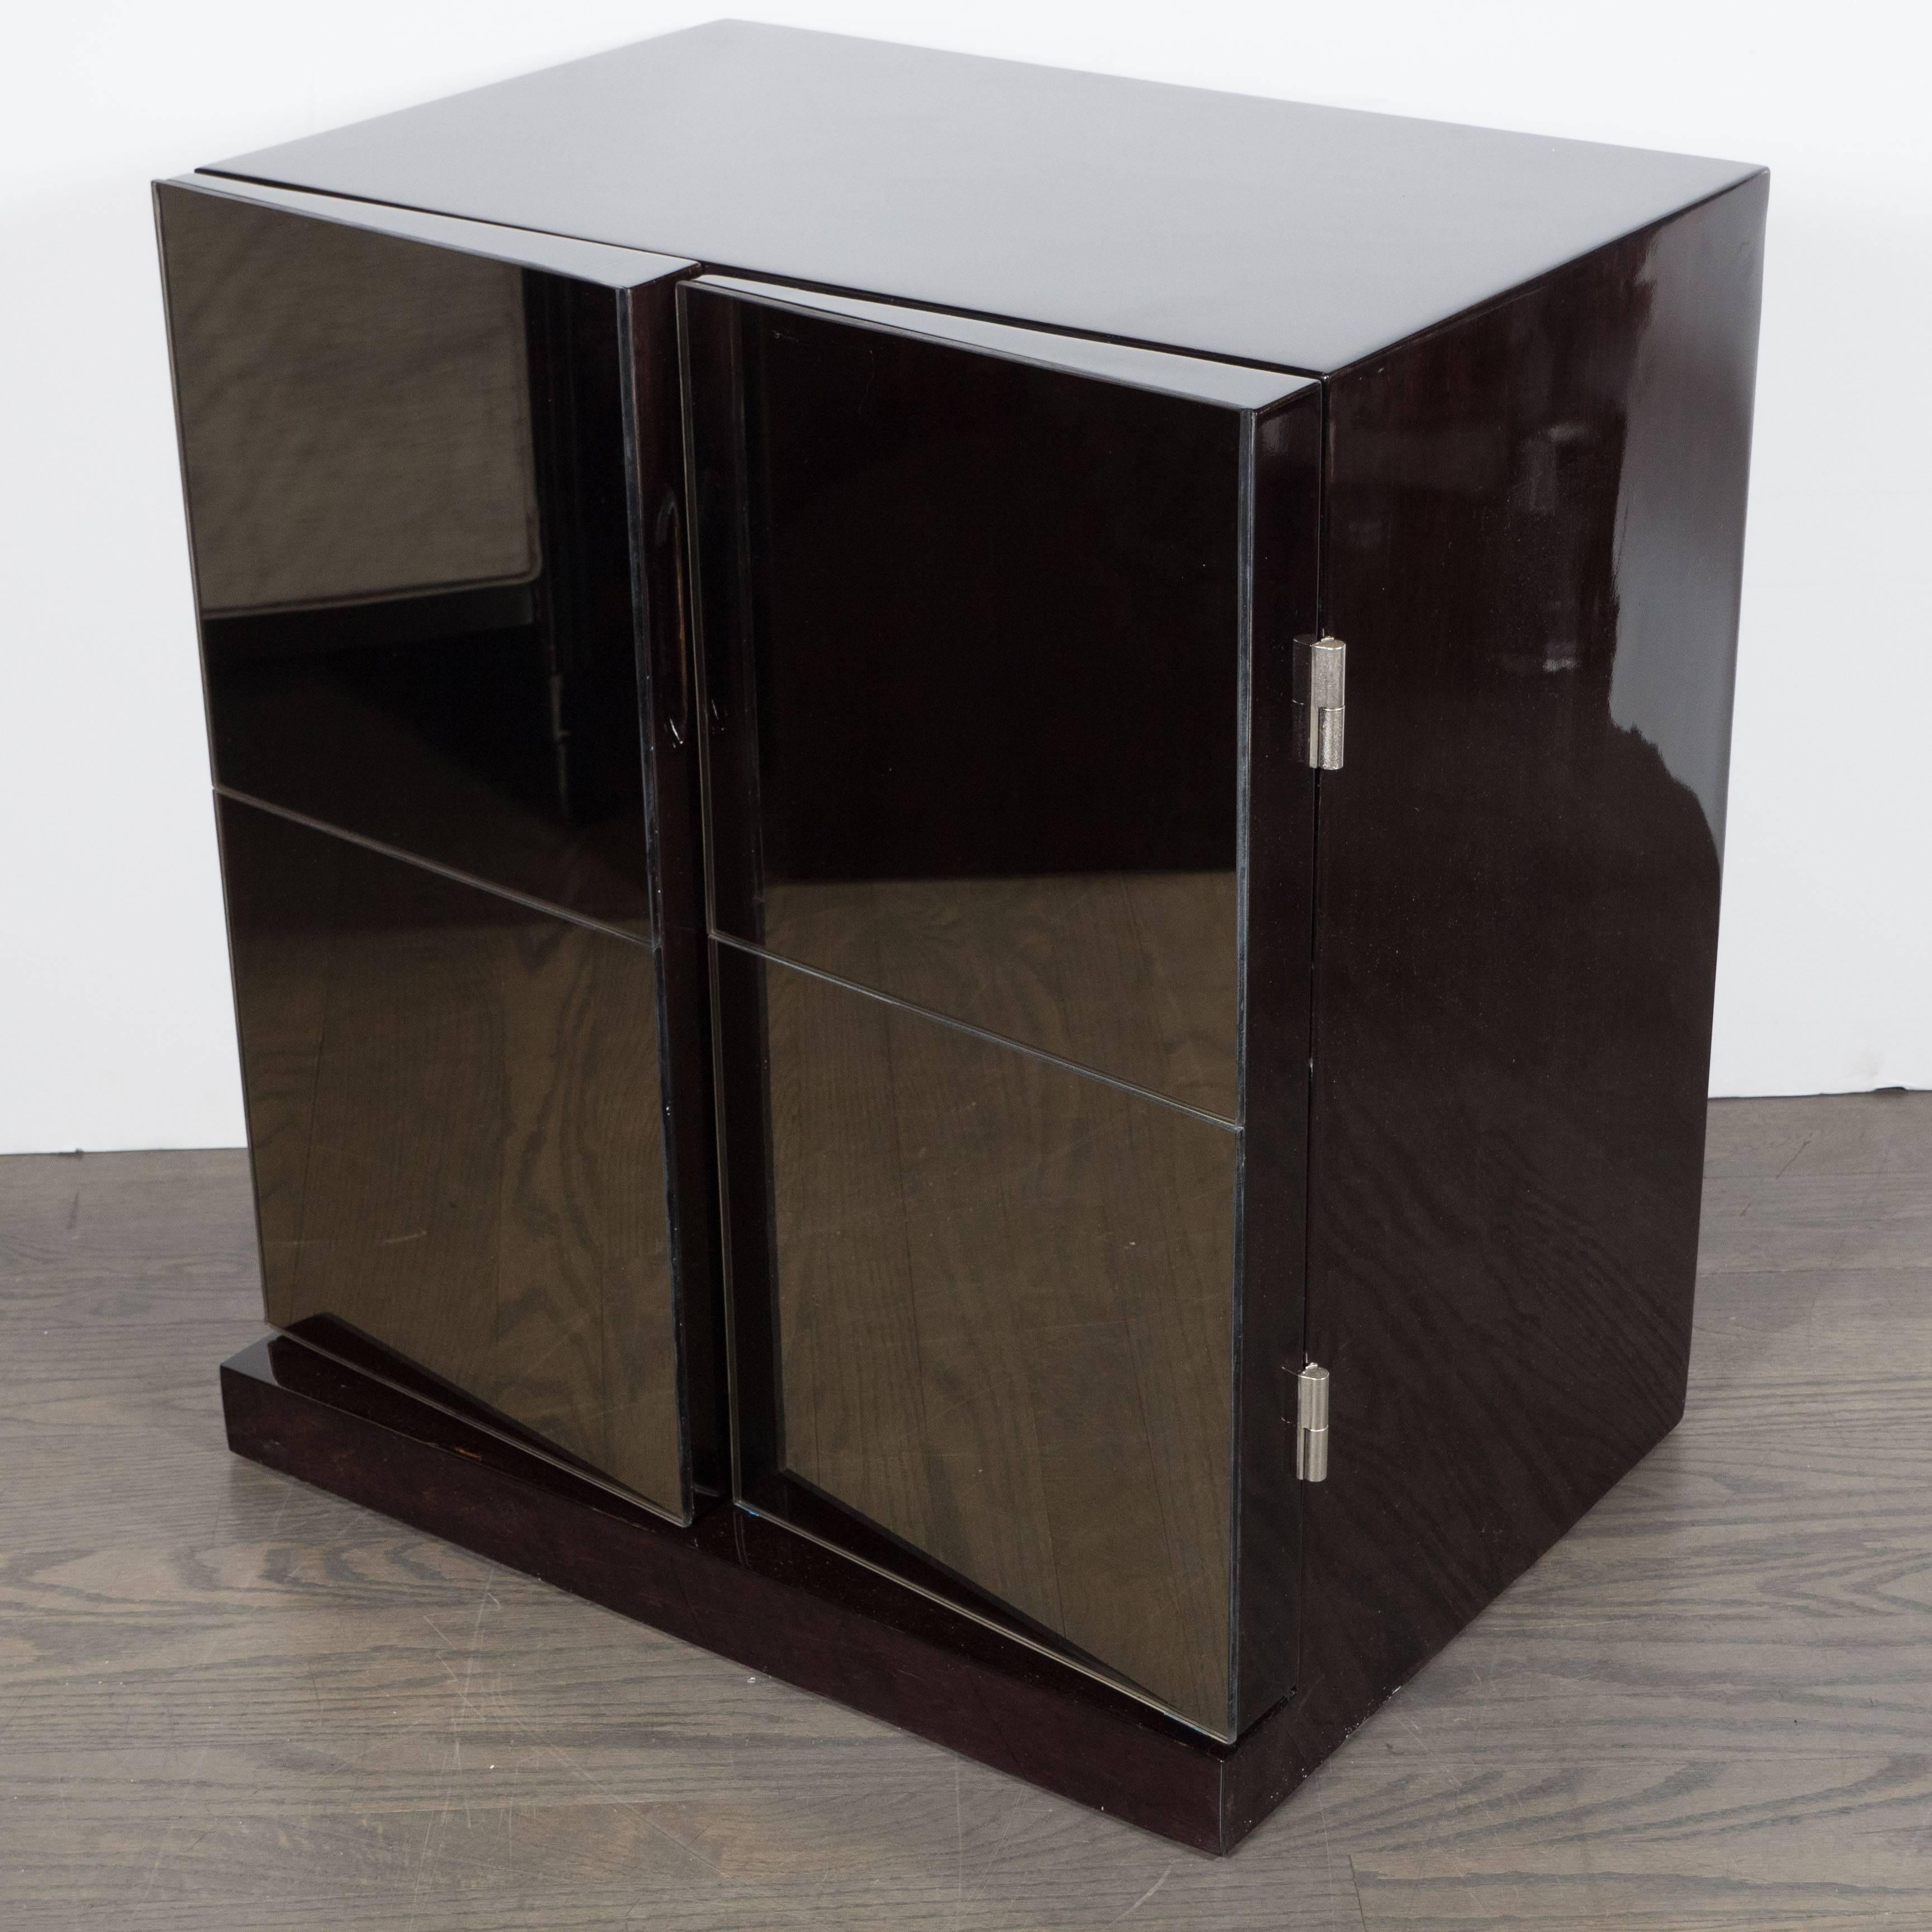 A pair of Mid-Century Modernist nightstands featuring angled Cubist smoked mirror fronts. Each piece of this mirrored pair features swing open doors revealing two levels divided by a single shelf. Finished in ebonized walnut, this pair could also be